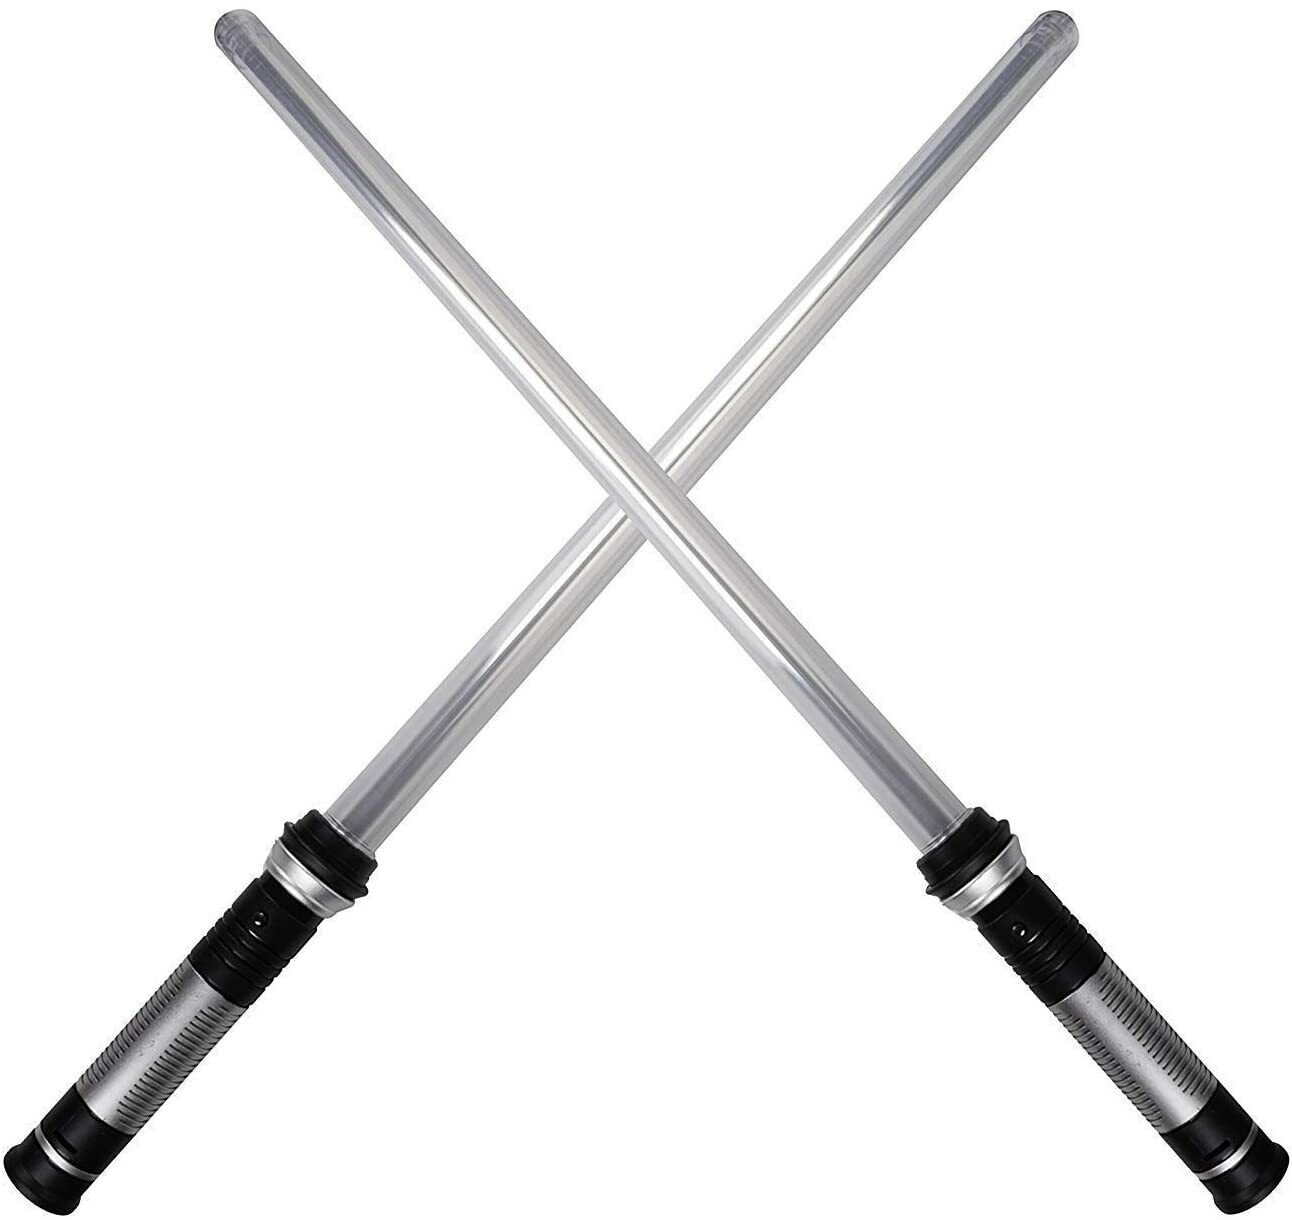 (2 PACK) NEW Dual Sided Light Saber Sword...free shipping